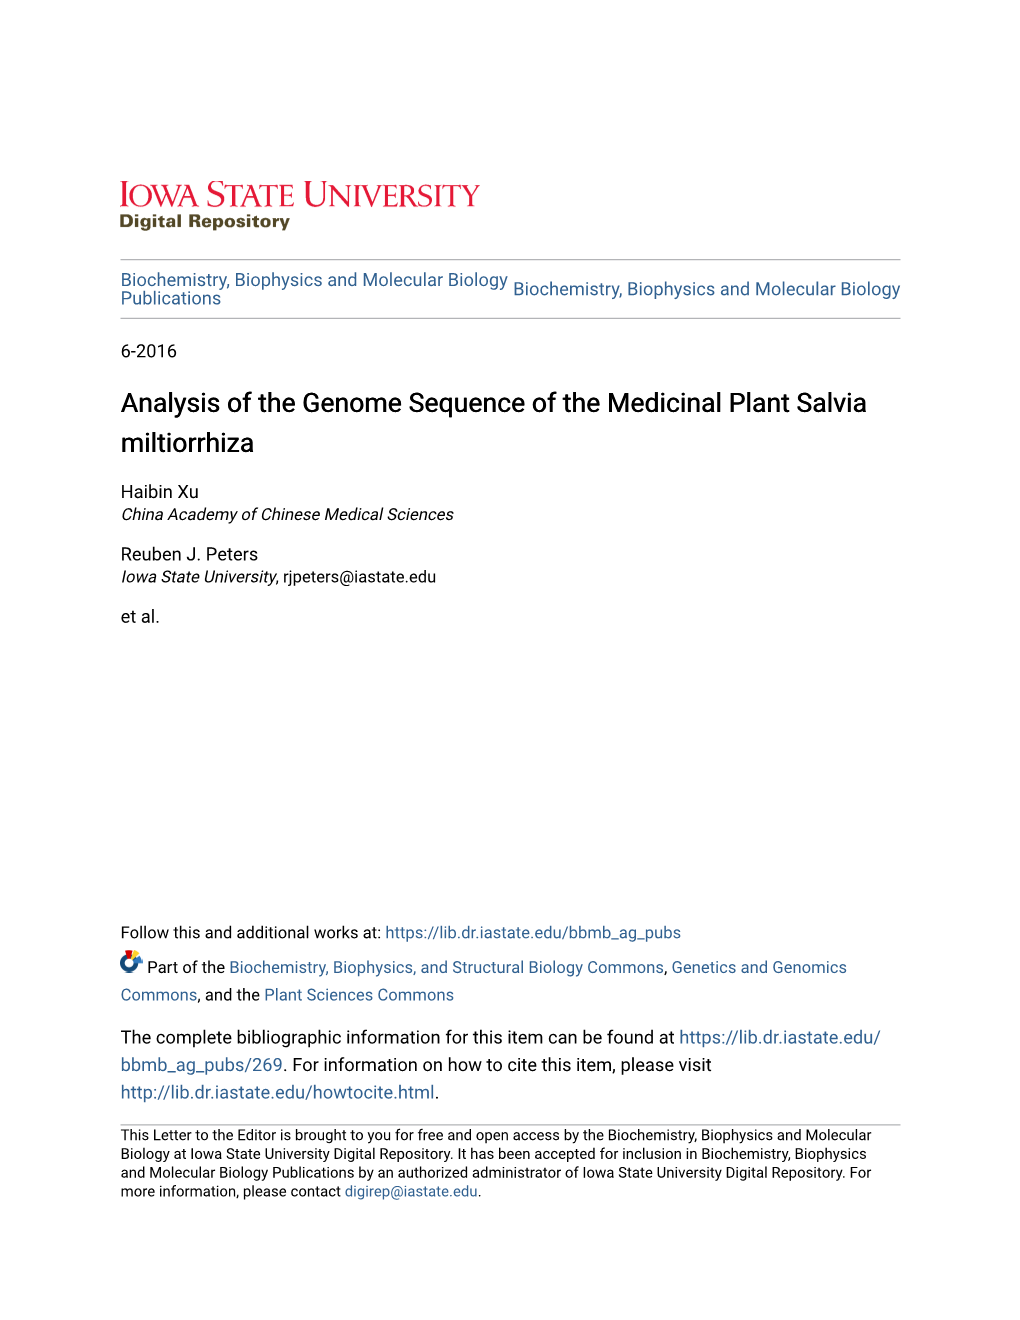 Analysis of the Genome Sequence of the Medicinal Plant Salvia Miltiorrhiza